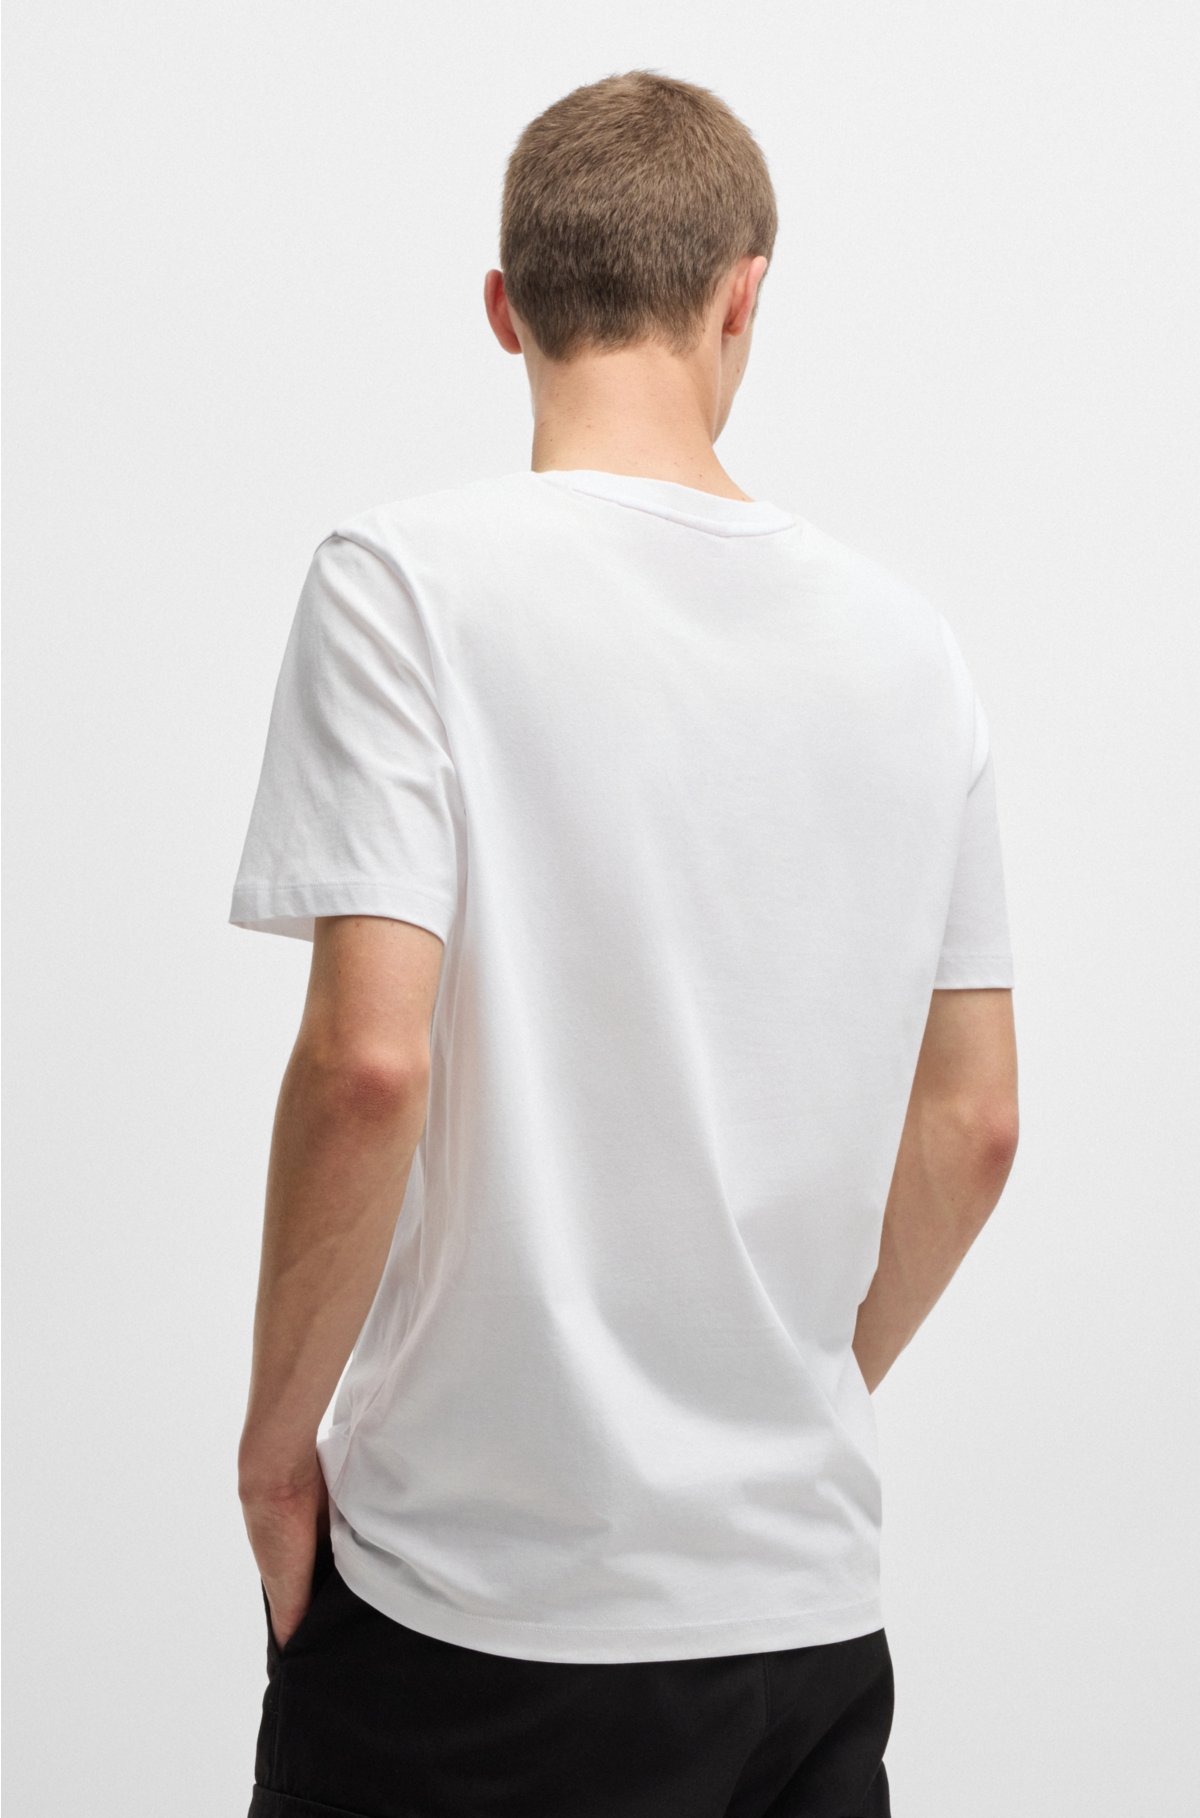 Cotton-jersey T-shirt with stacked logo print, White